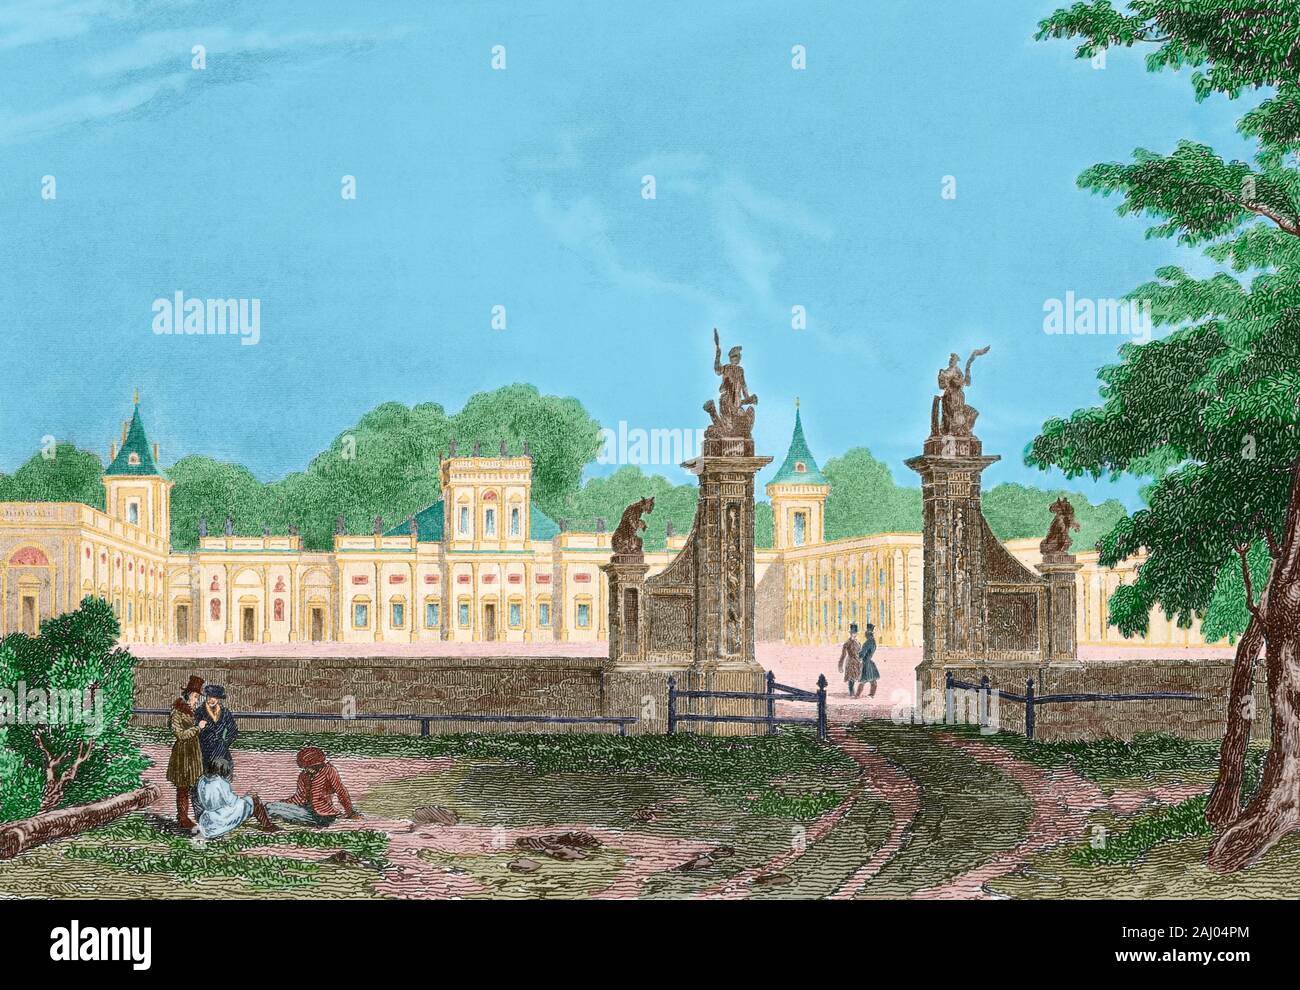 Poland. Wilanow Palace, located in Willanow district, Warsaw. Baroque royal residence on the village that was property of King John Sobieski III (1624-1696). Drawing by J. Arnout. Engraving by Lalaisse, 1840. Later colouration. Stock Photo